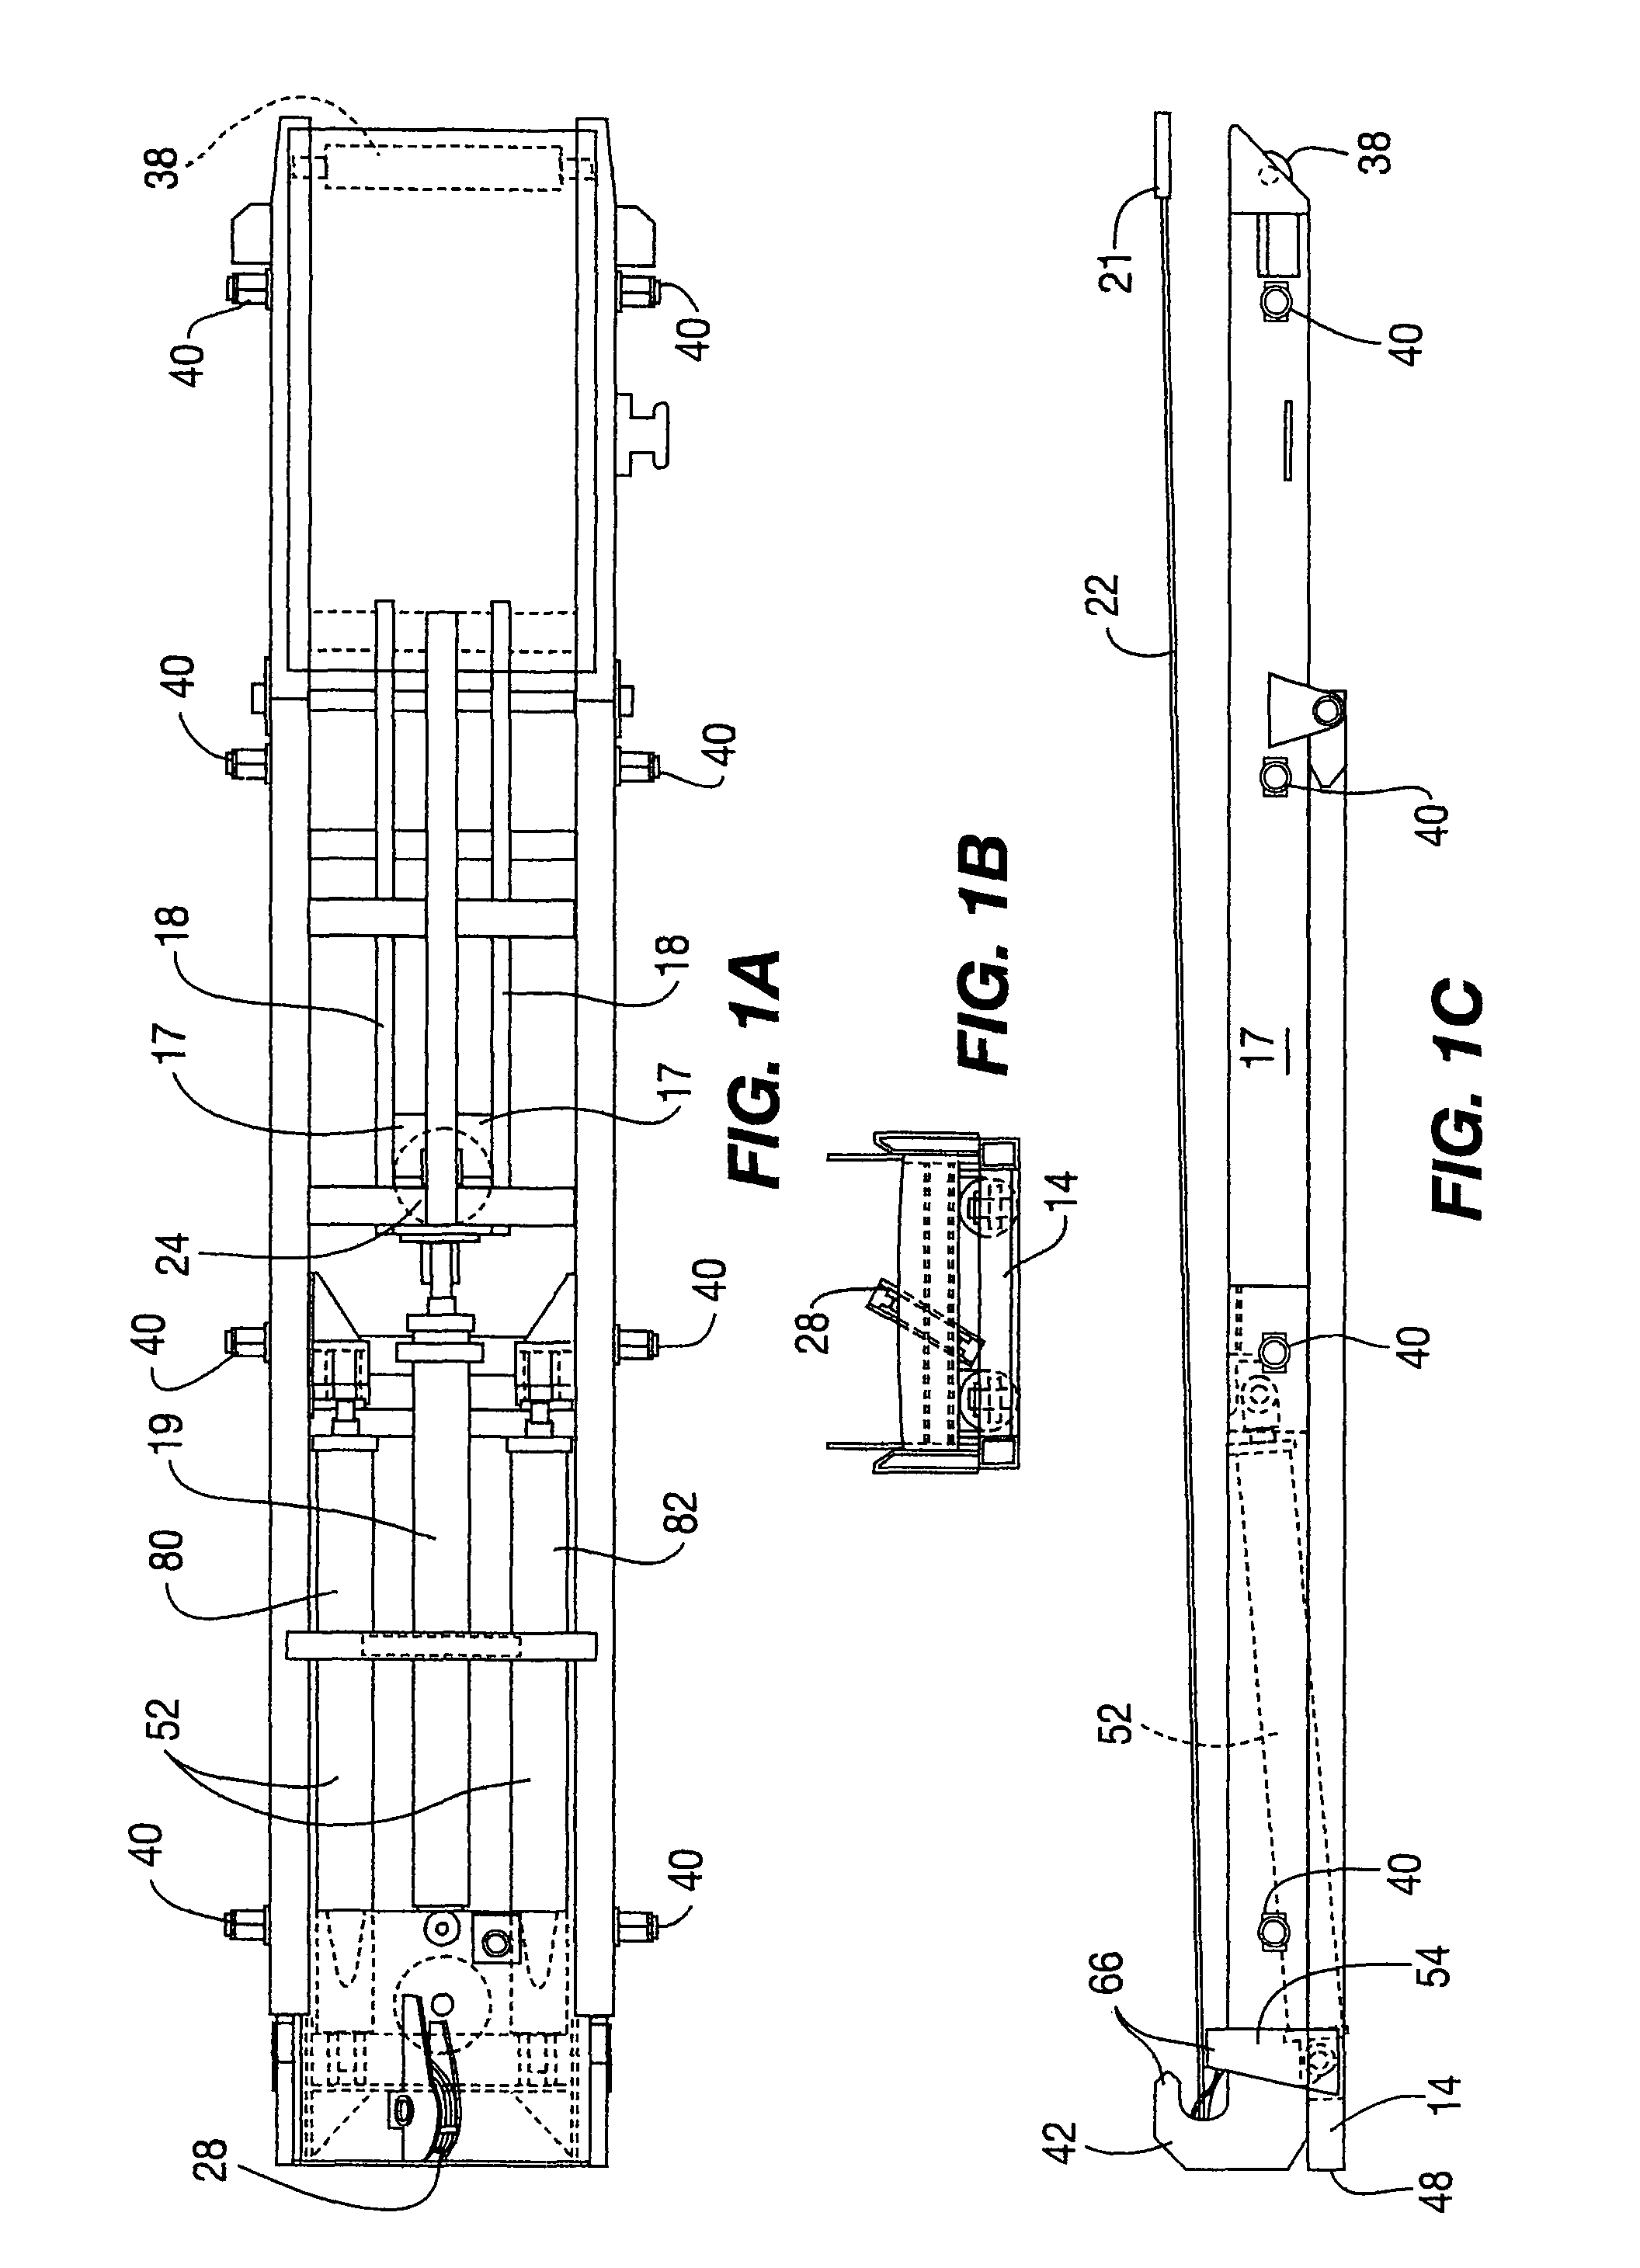 Cable hoisting apparatus